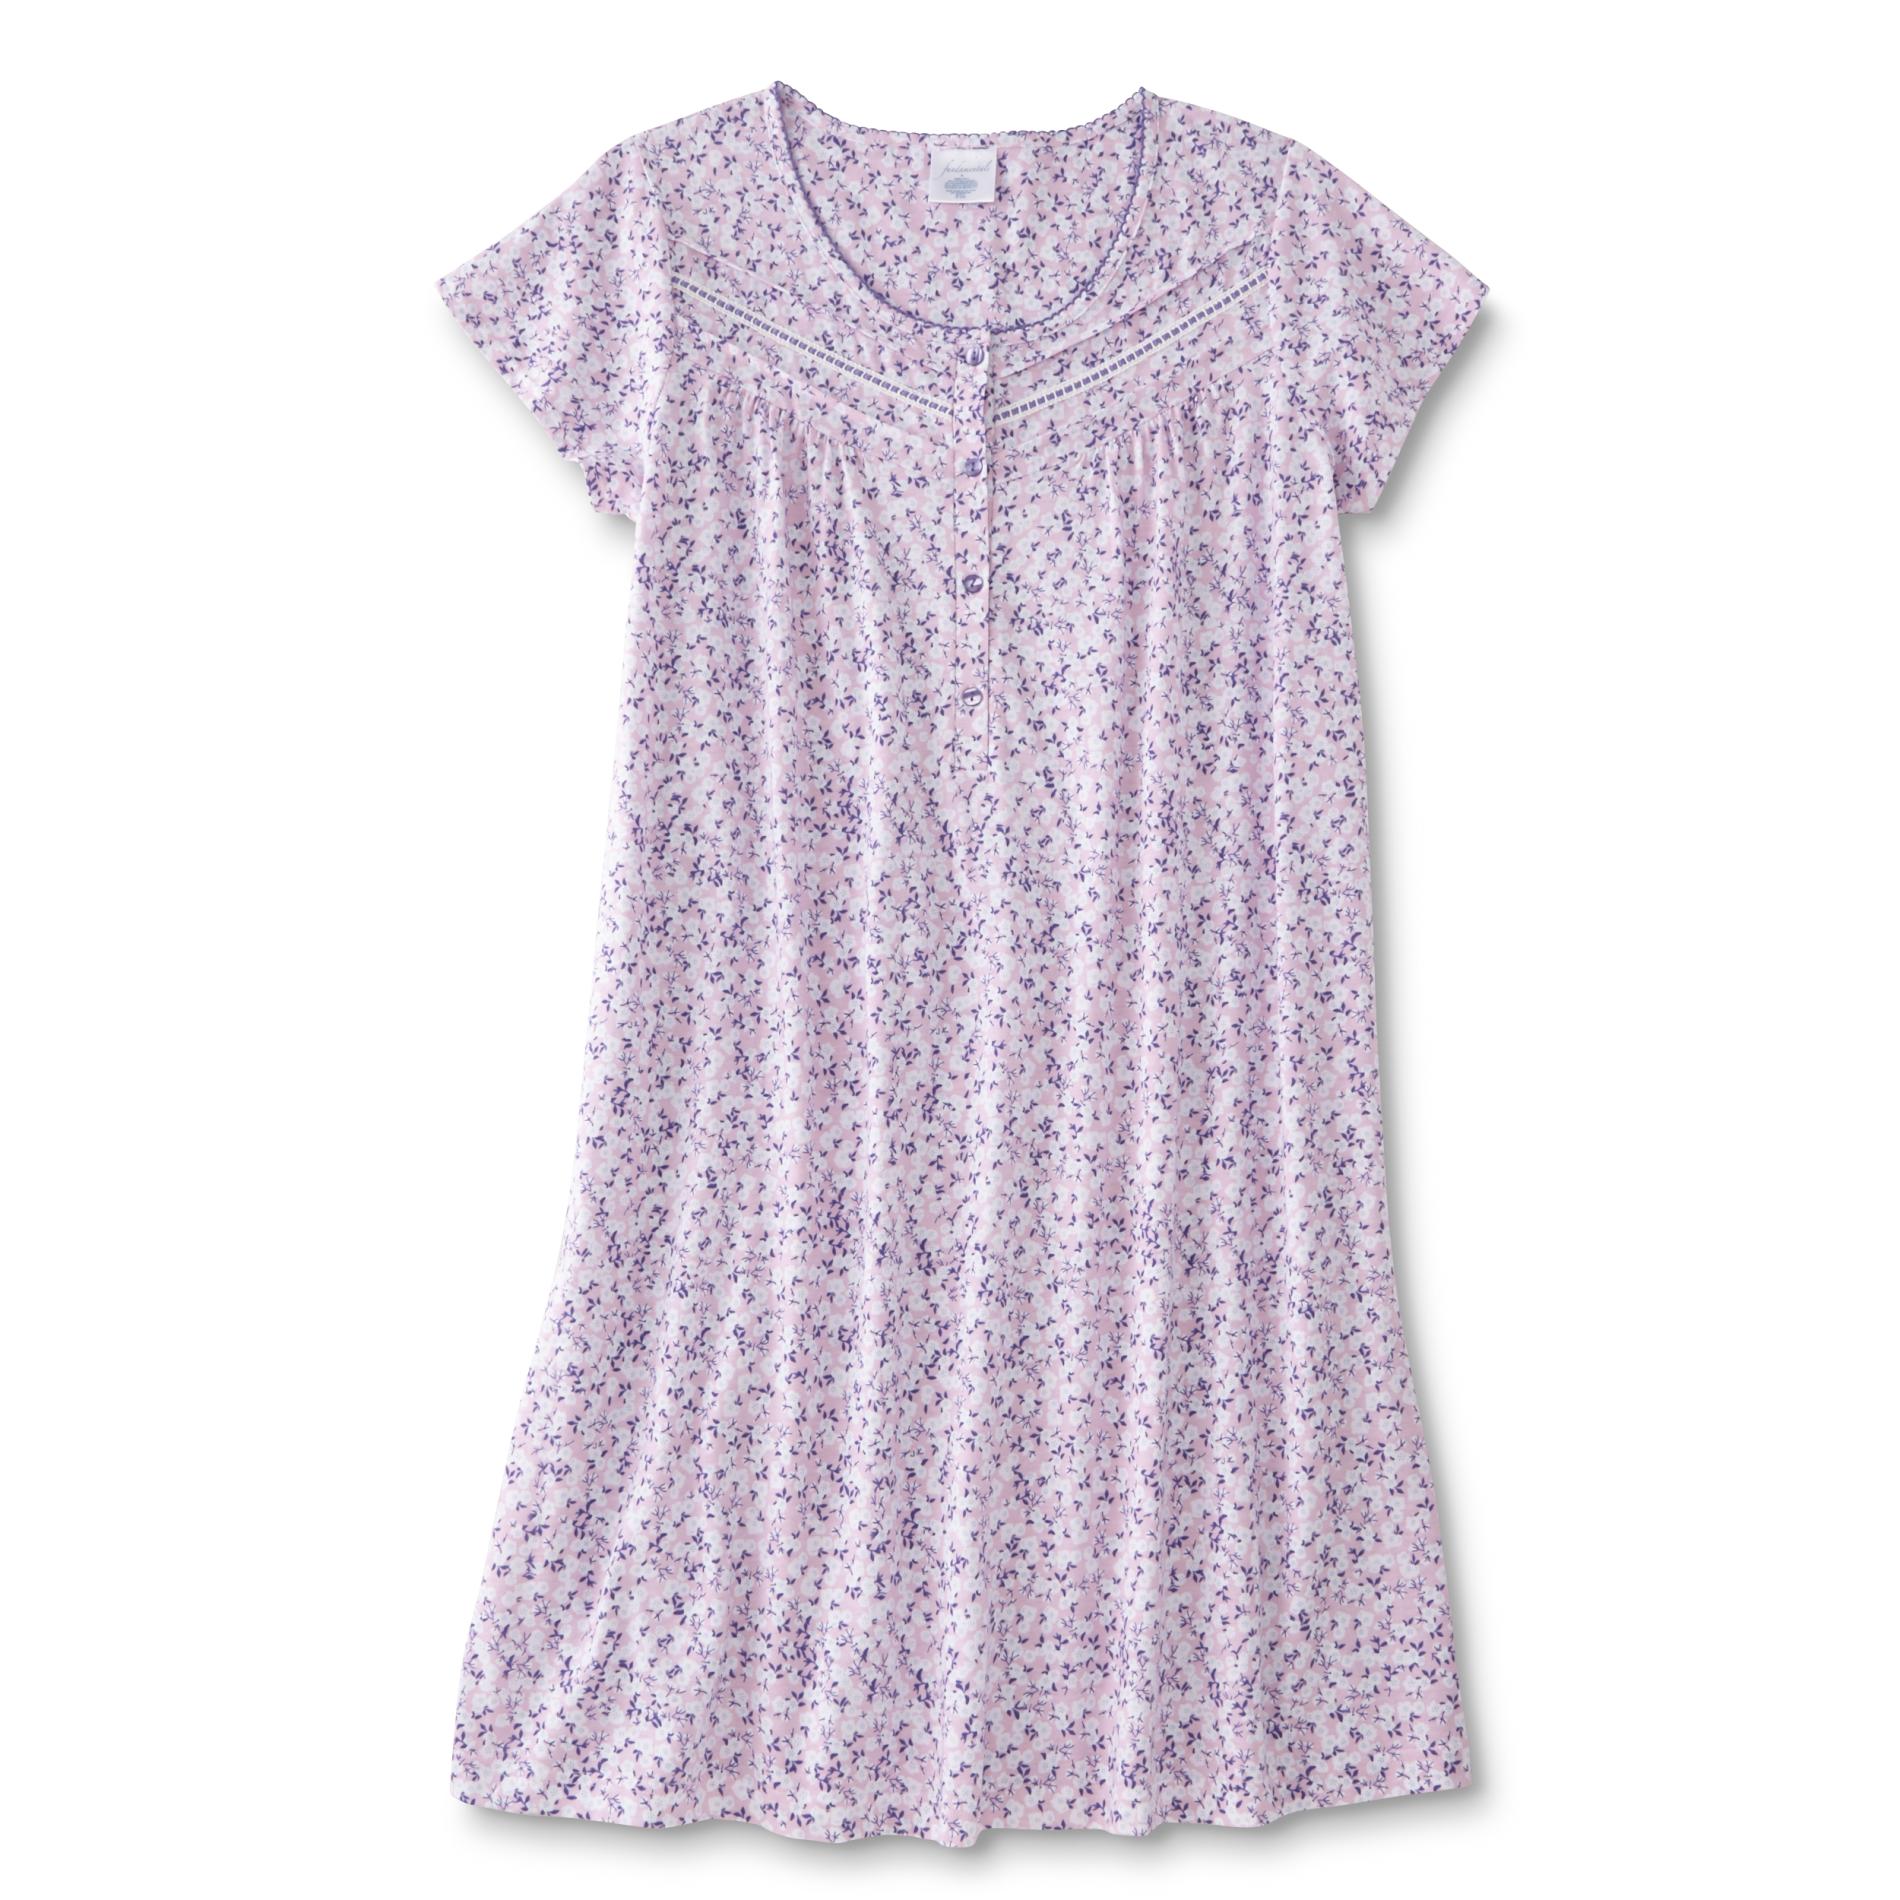 Fundamentals Women's Nightgown - Floral